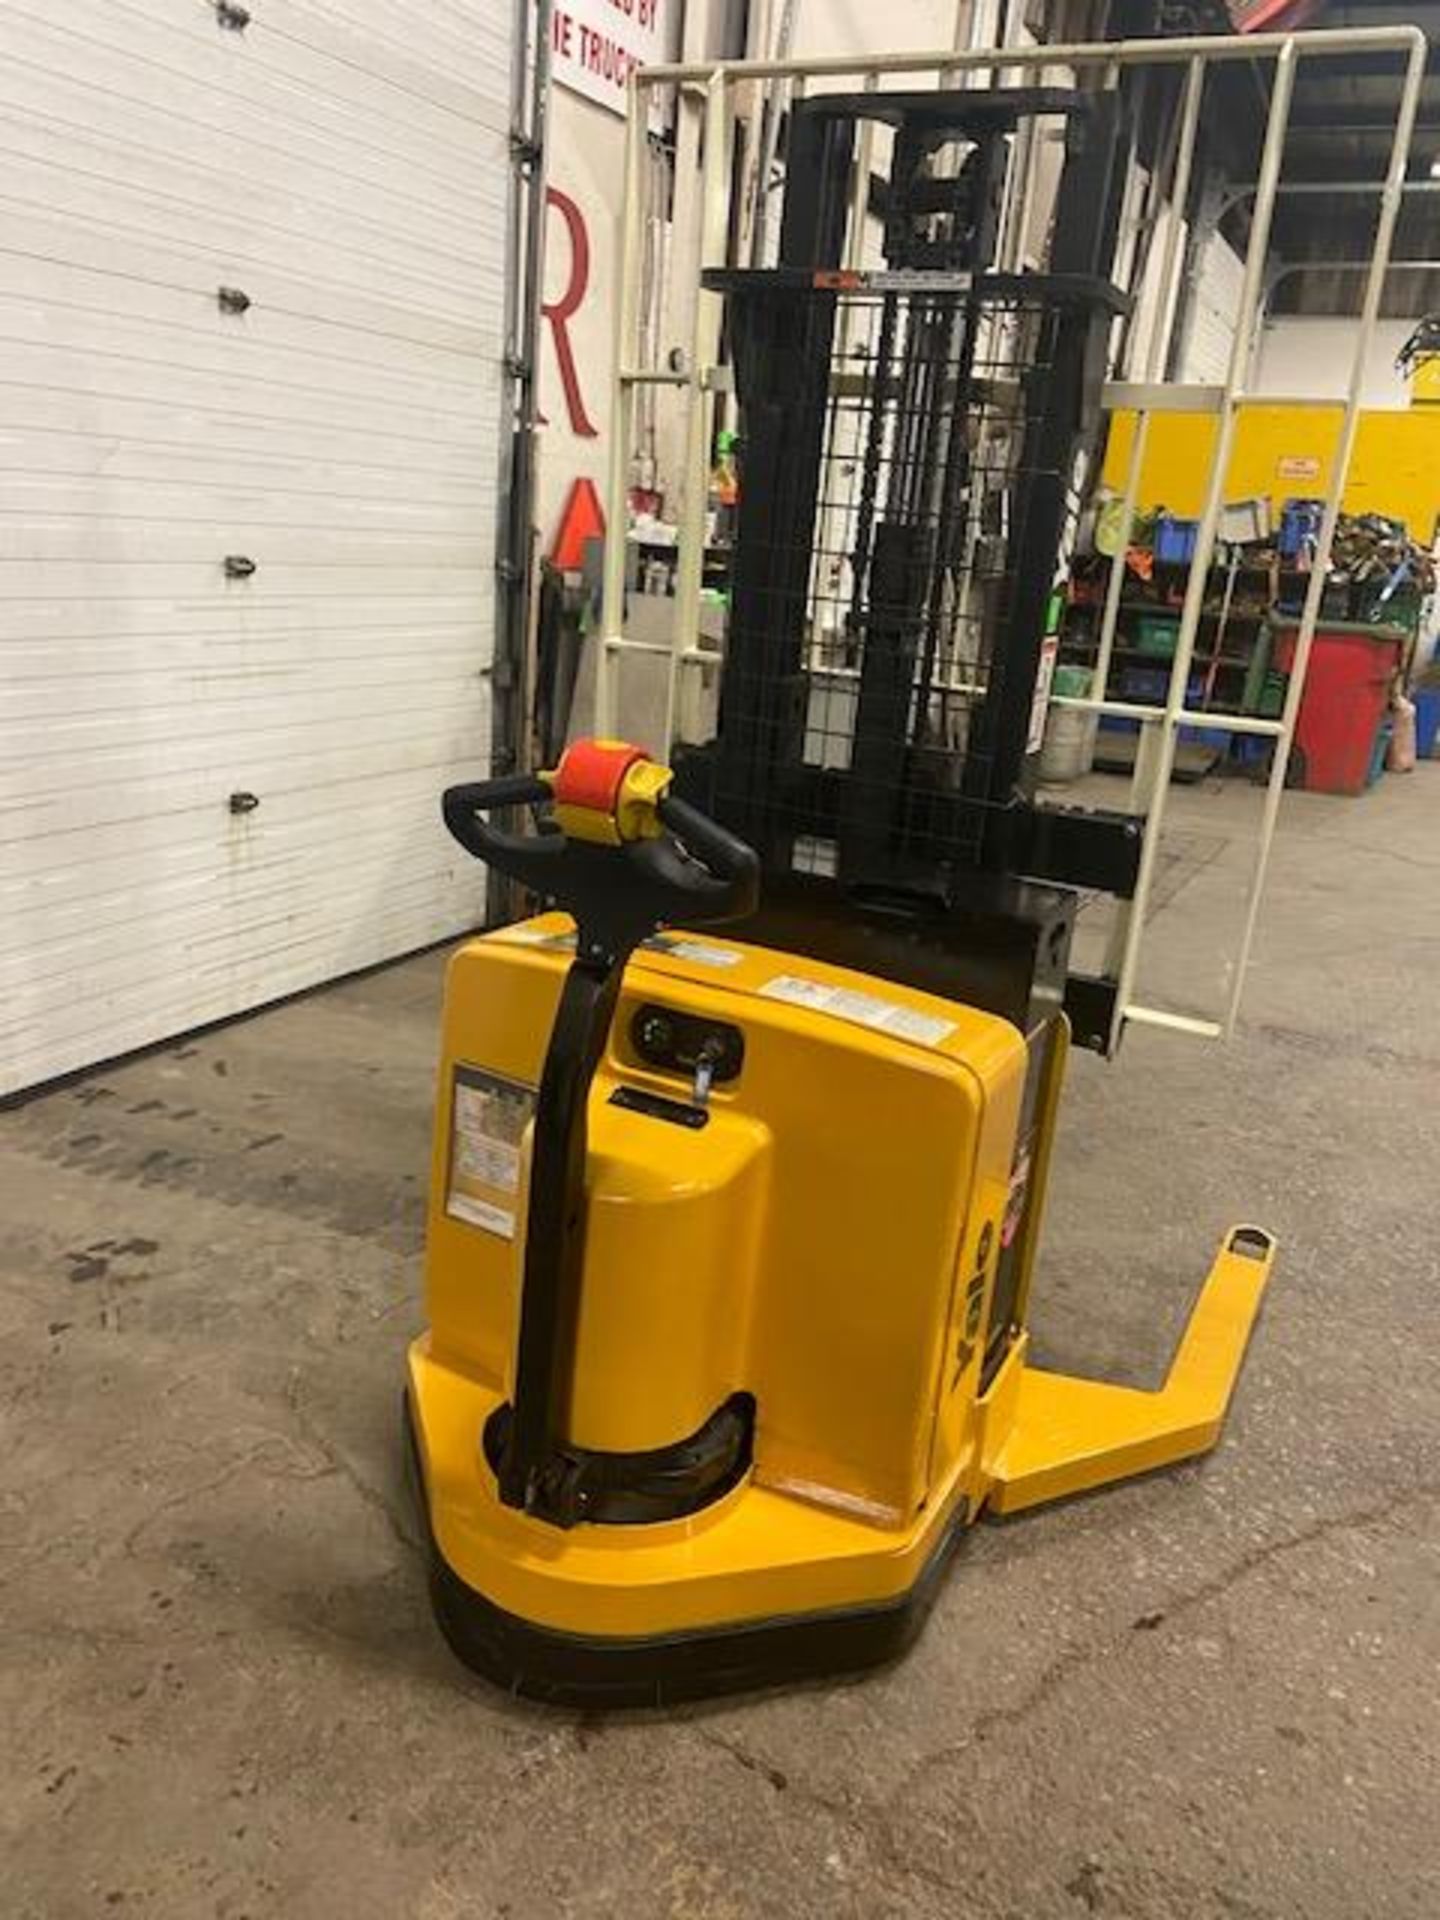 FREE CUSTOMS - 2008 Yale Order Picker 4000lbs capacity Electric Powered Pallet Cart Lifter with - Image 3 of 3